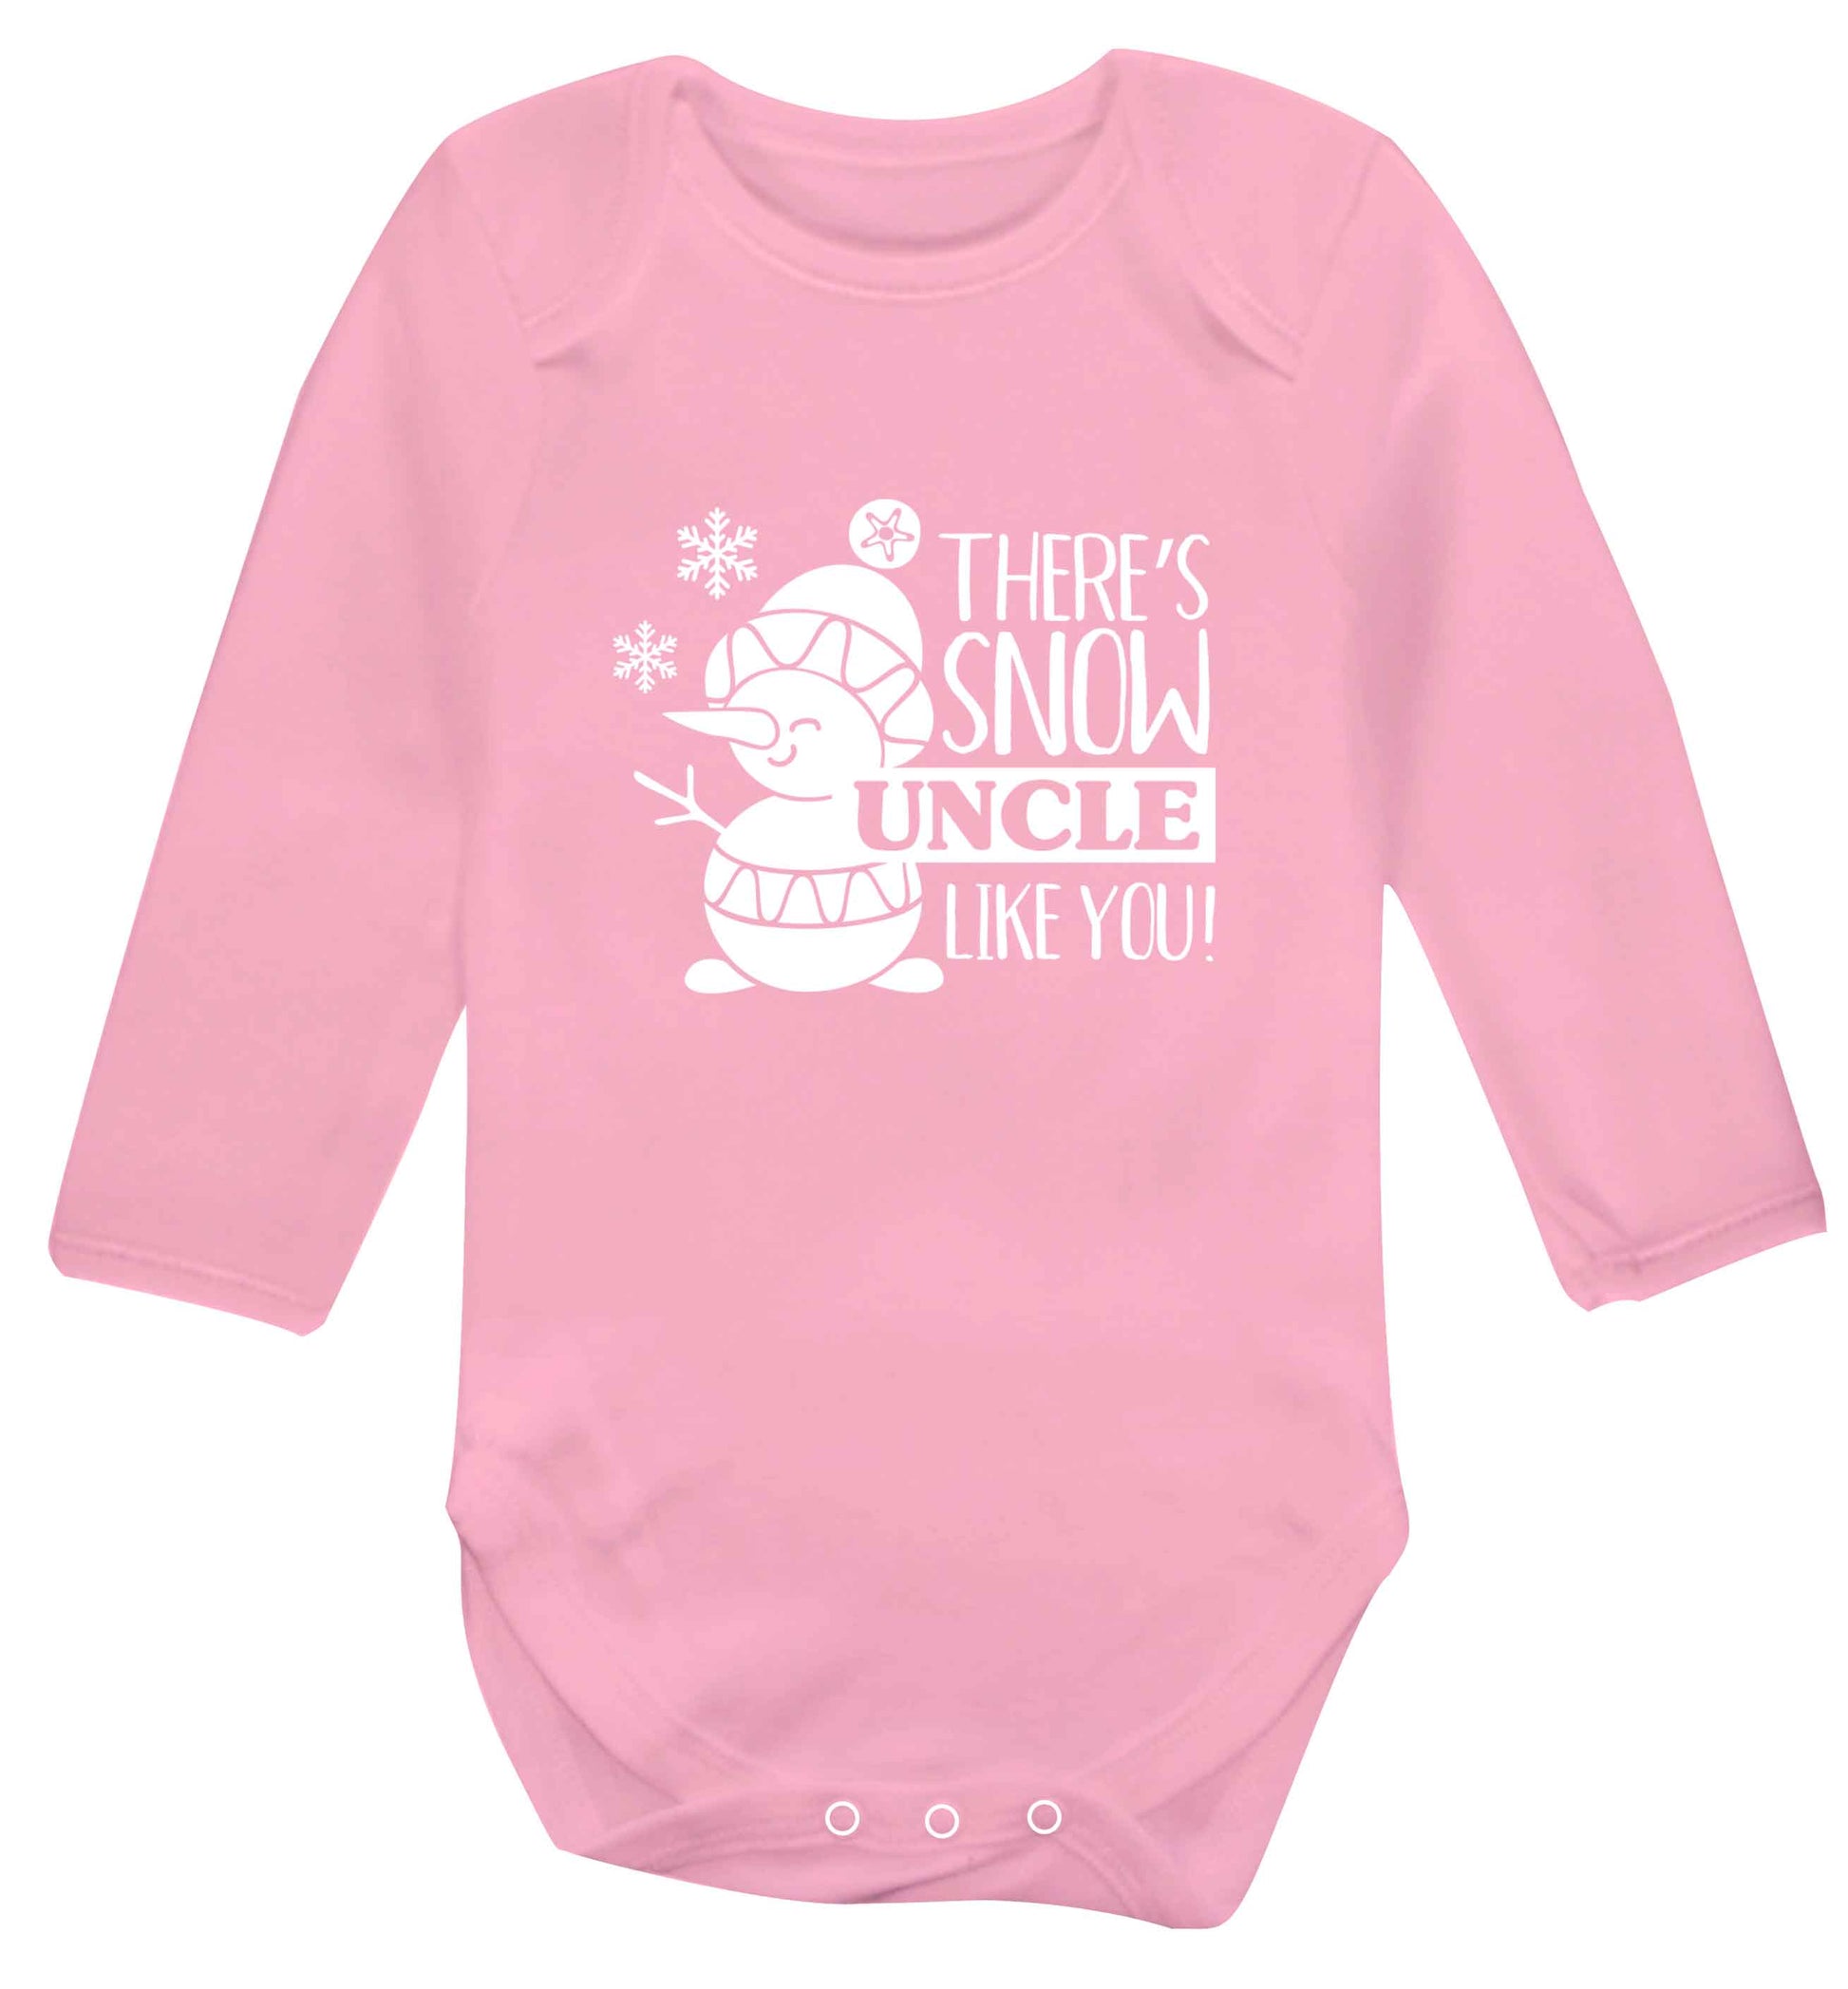 There's snow uncle like you baby vest long sleeved pale pink 6-12 months